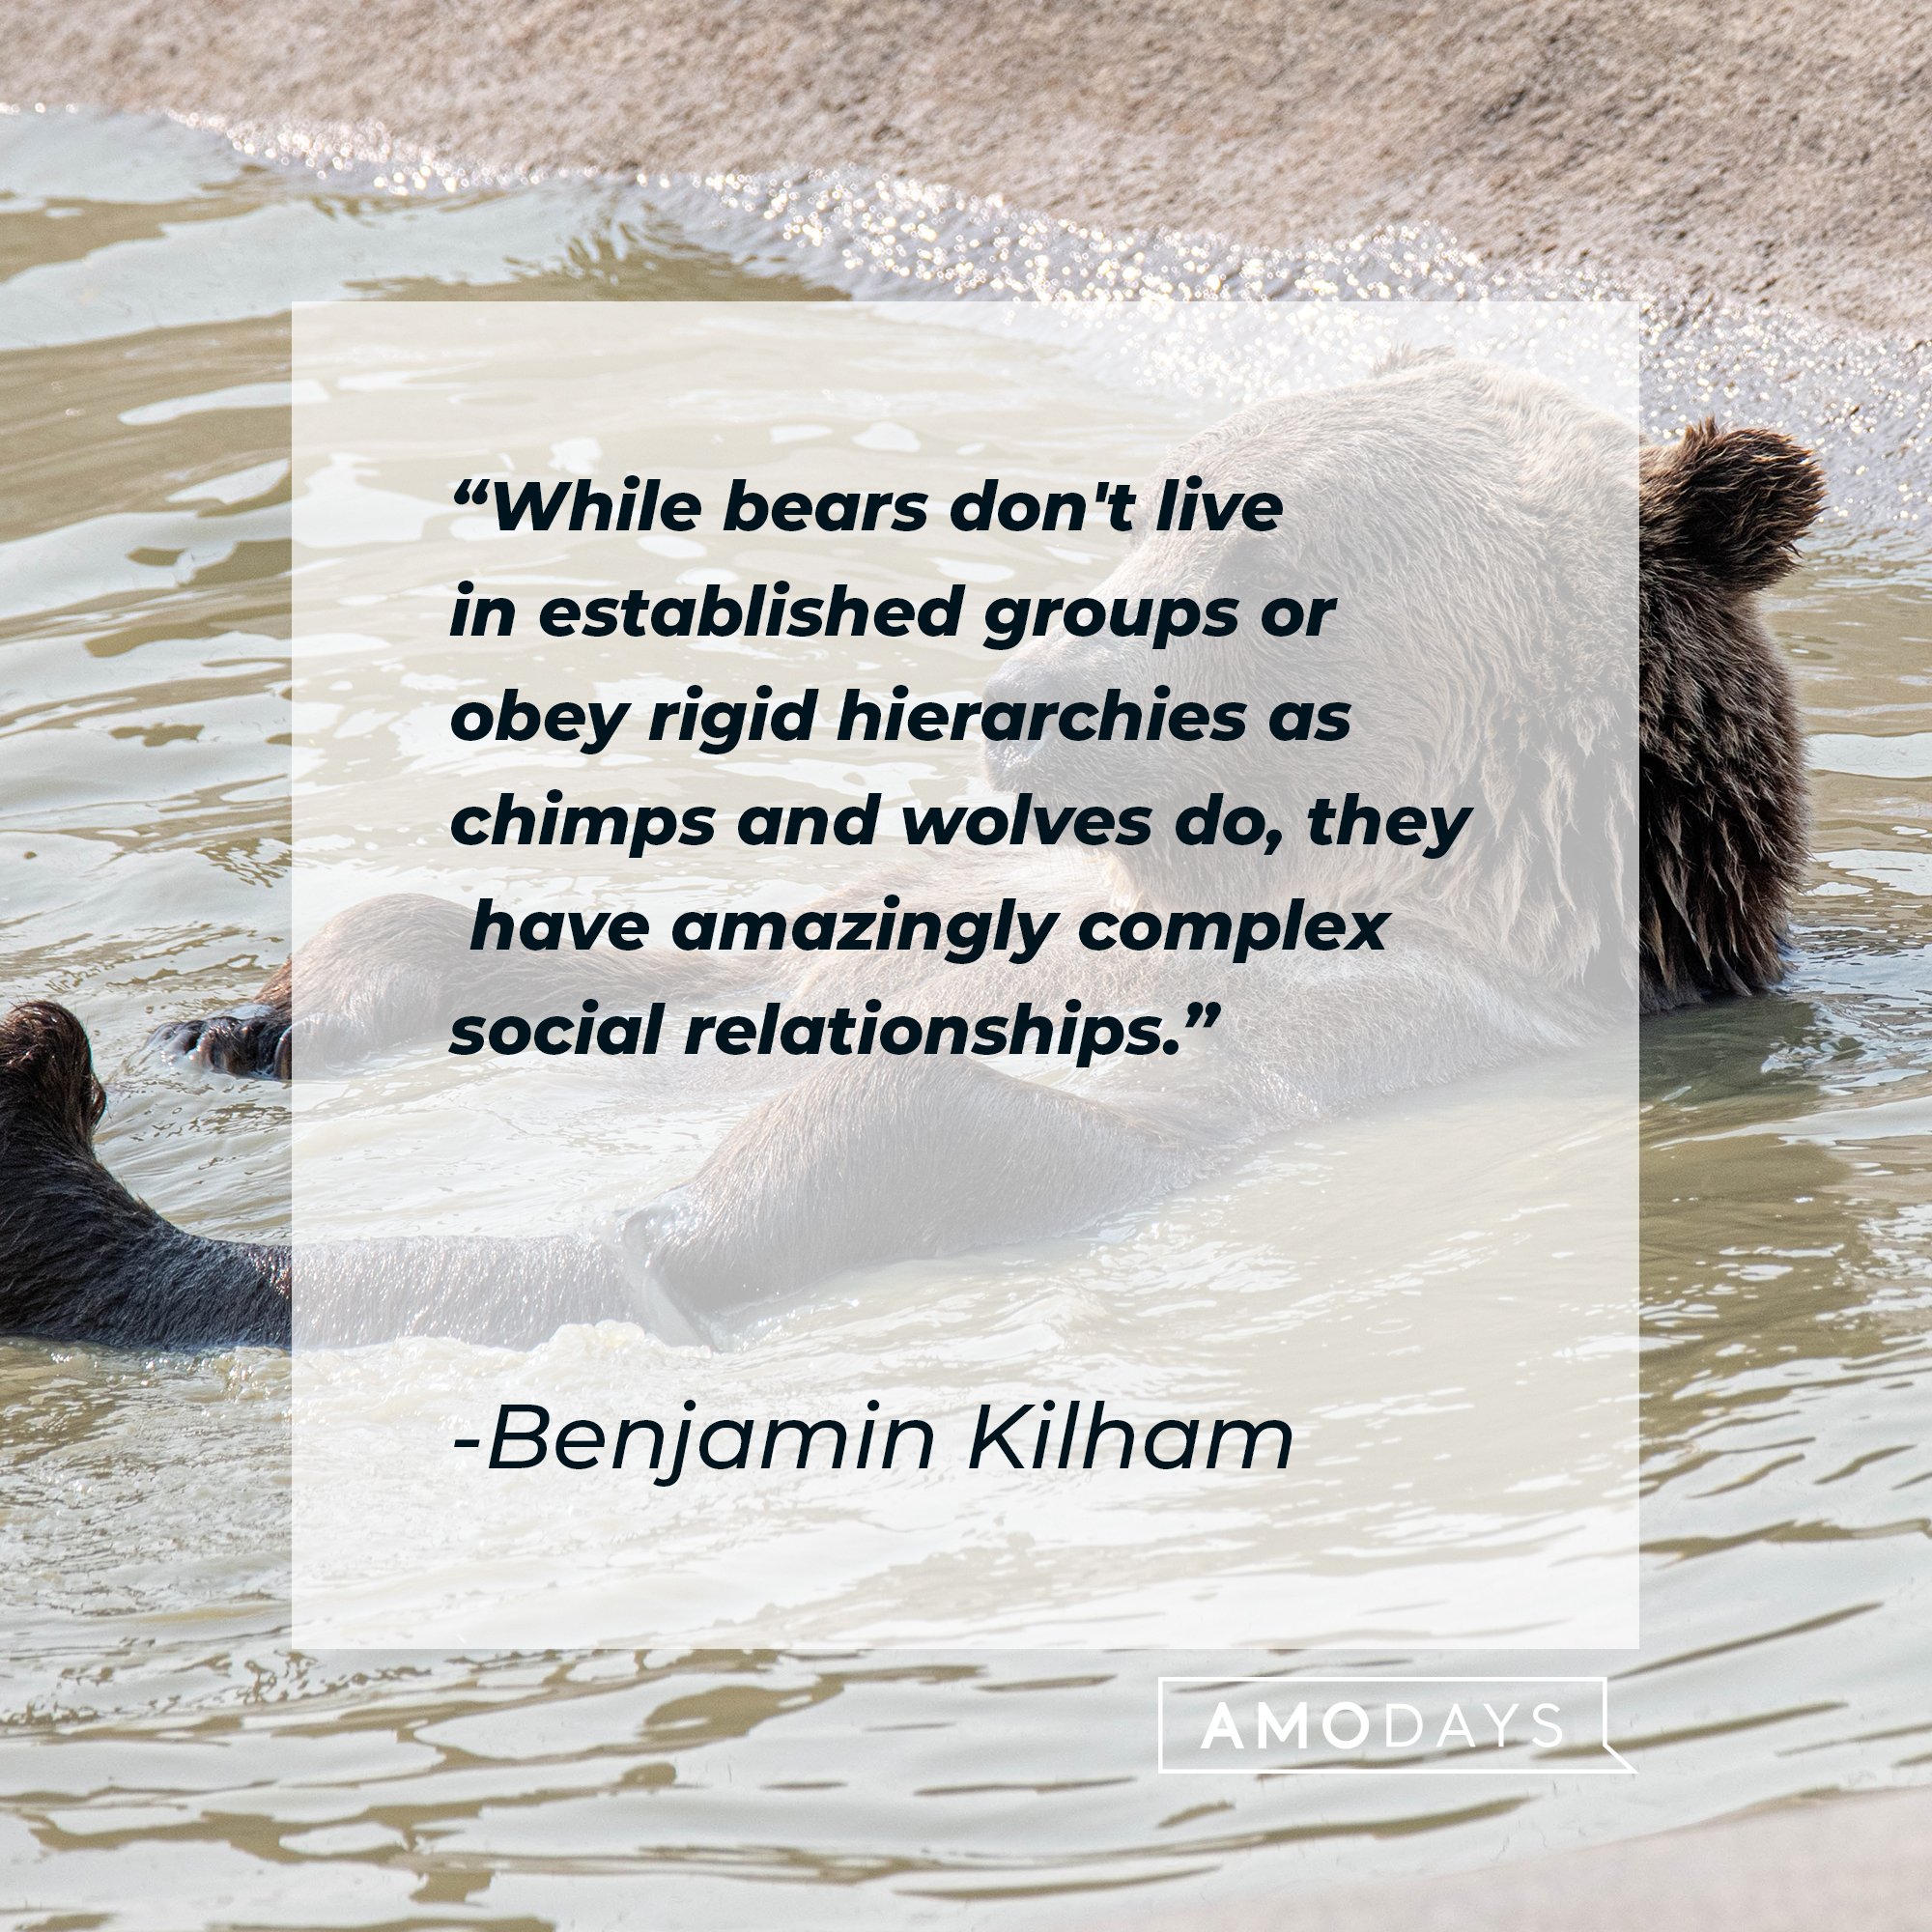 Benjamin Kilham’s quote: "While bears don't live in established groups or obey rigid hierarchies as chimps and wolves do, they have amazingly complex social relationships."  | Image: AmoDays